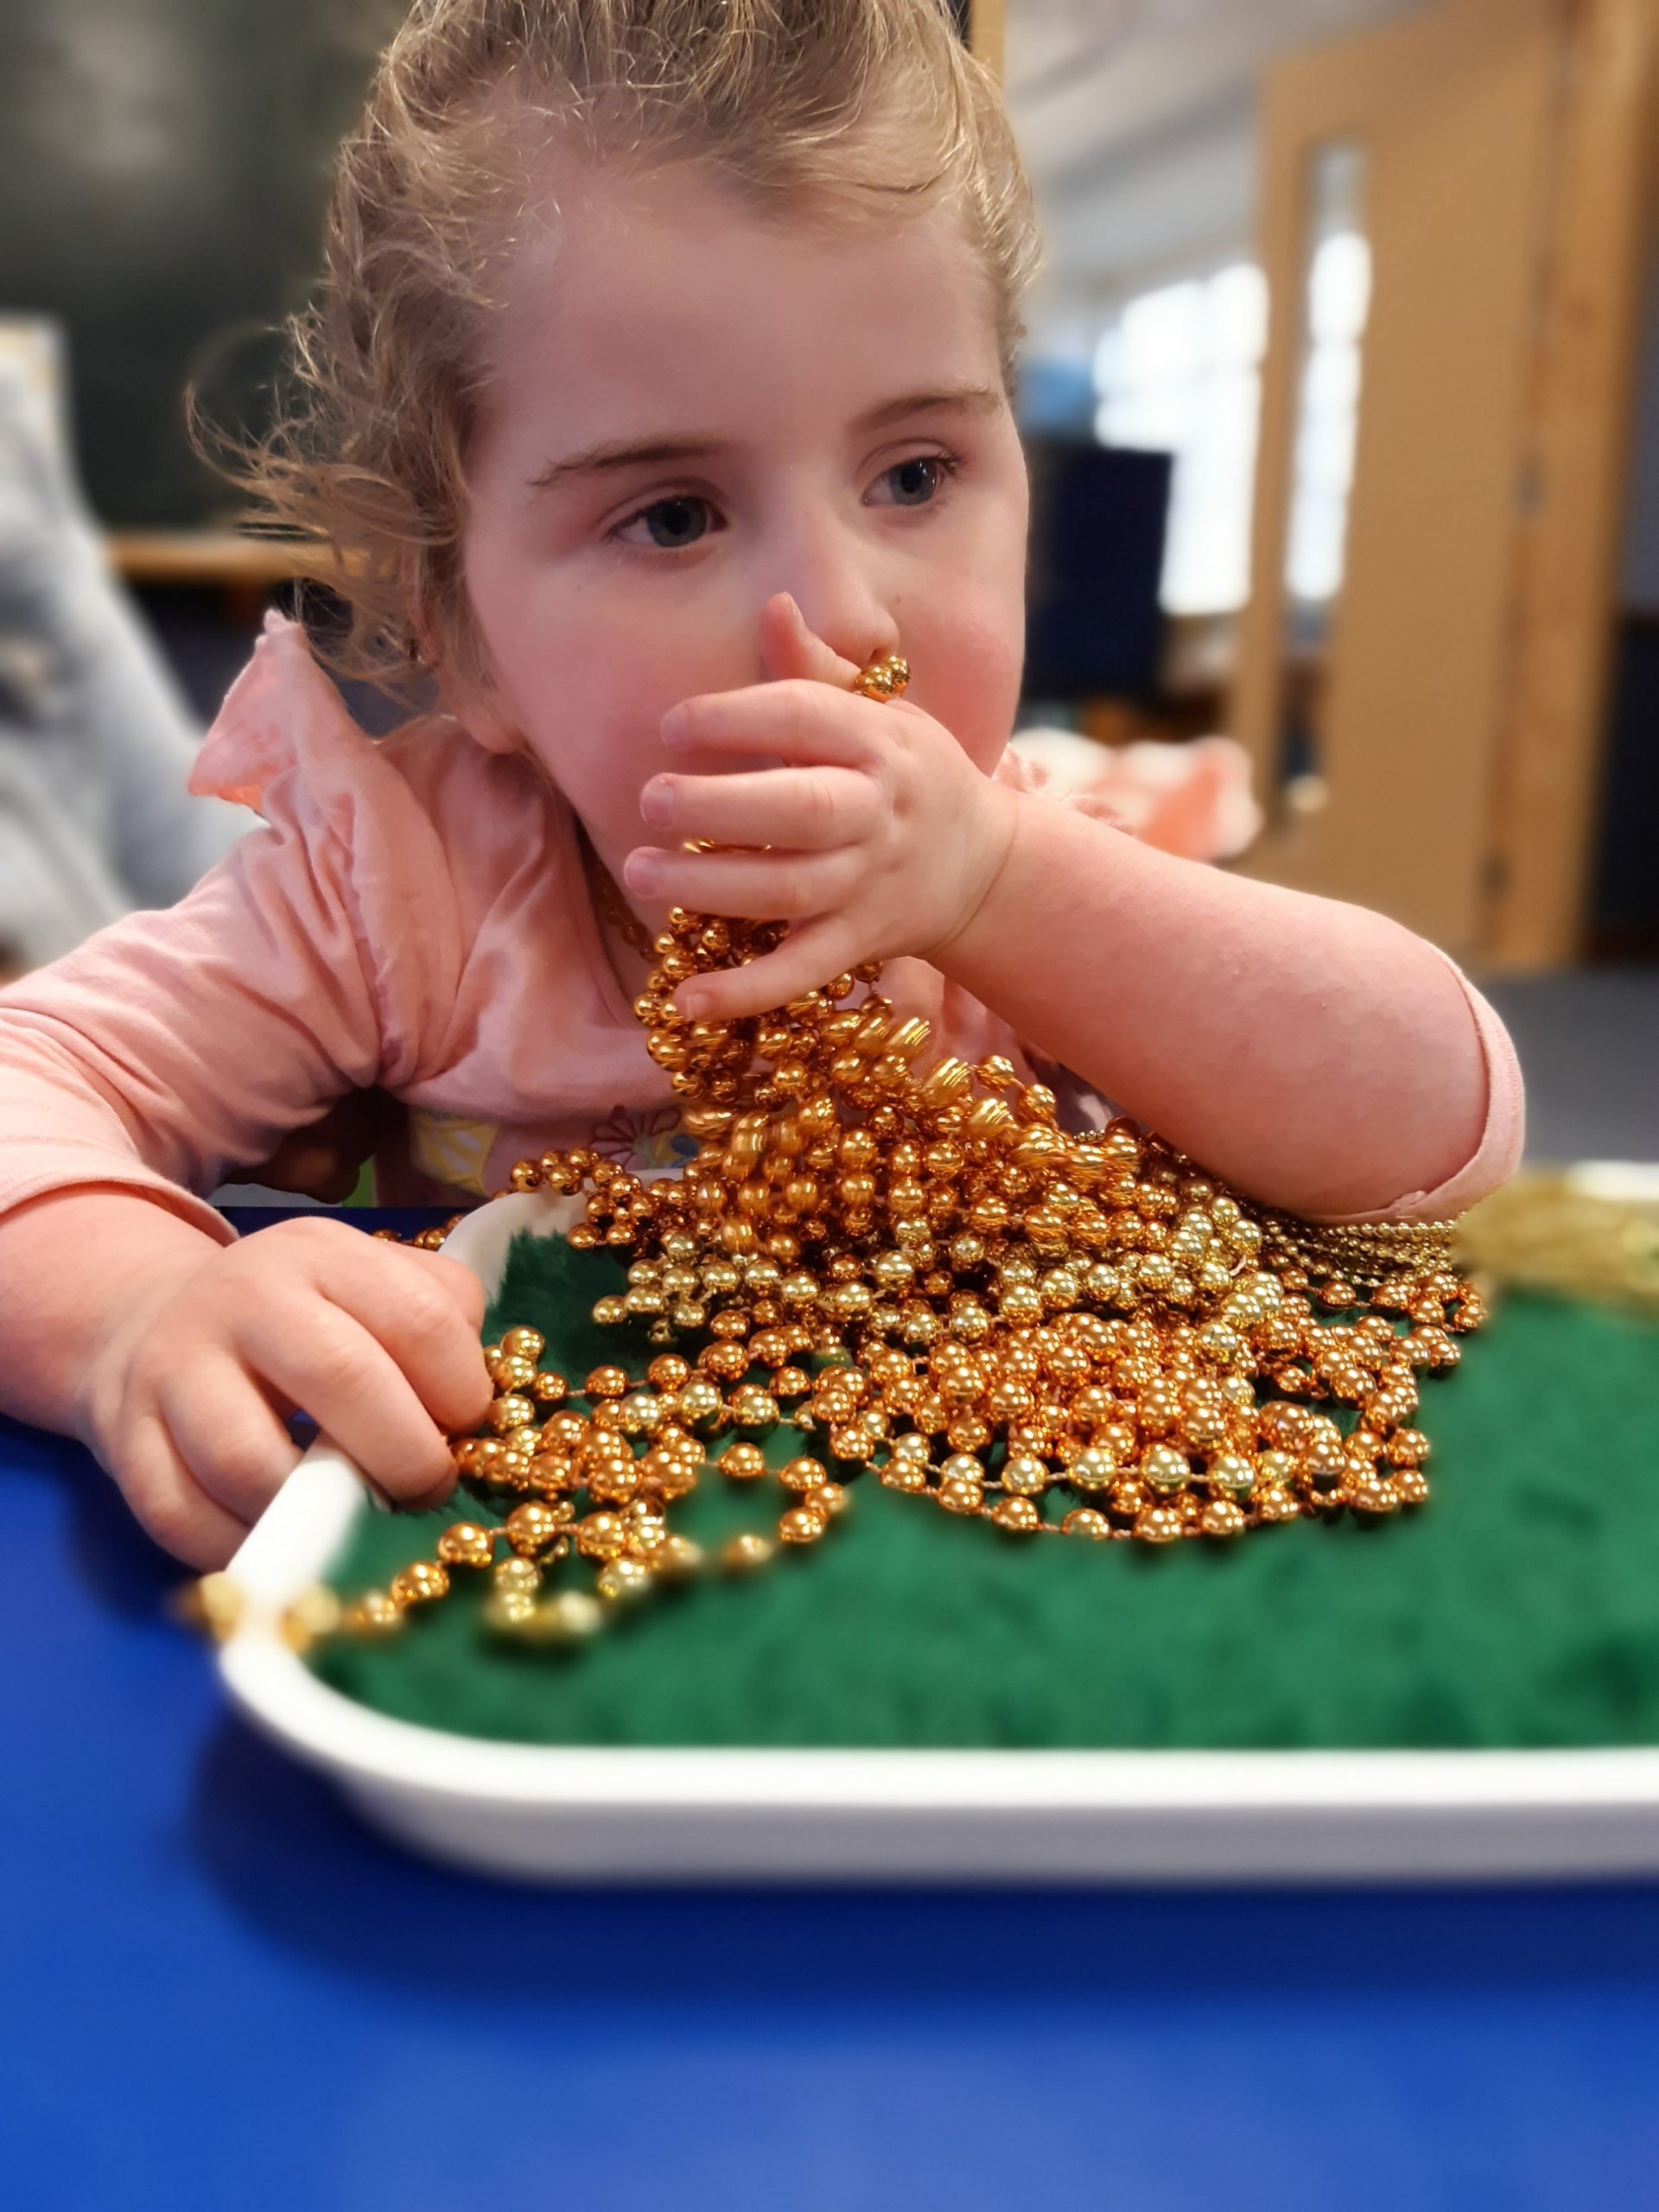 Figure 2 - Child is sitting at a table exploring a string of beads on a tray with her hands 